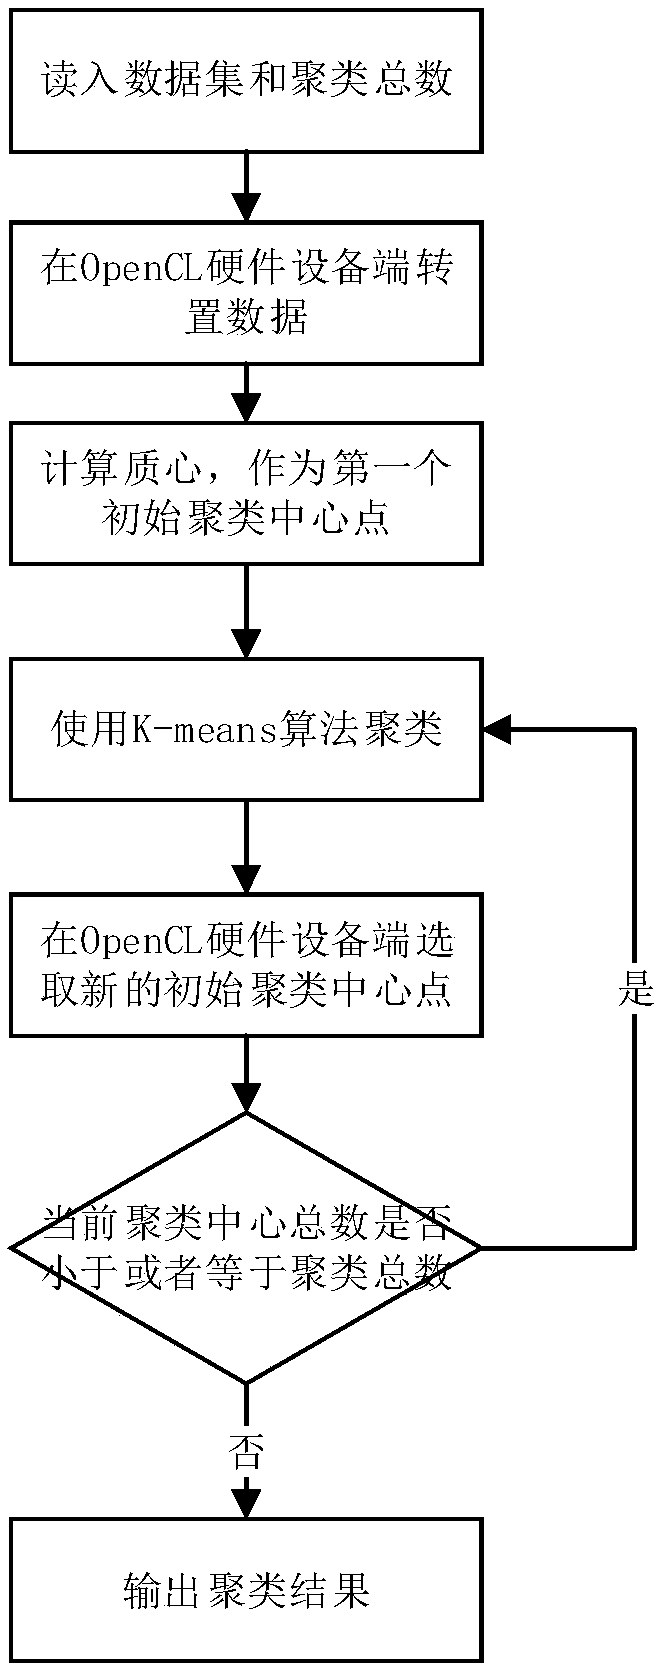 Fast global K-means clustering method of using OpenCL (Open Computing Language) acceleration